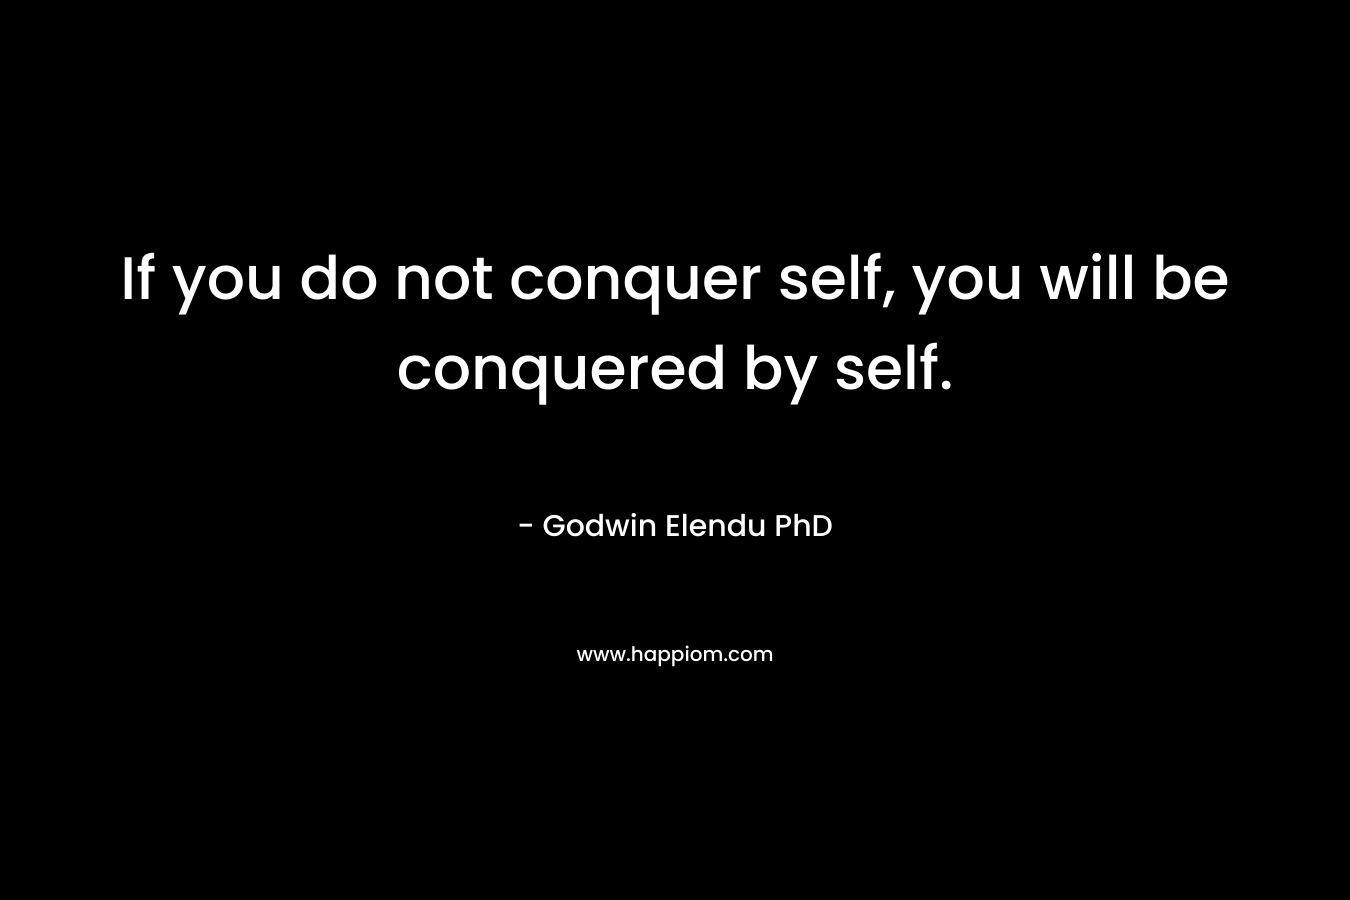 If you do not conquer self, you will be conquered by self. – Godwin Elendu PhD